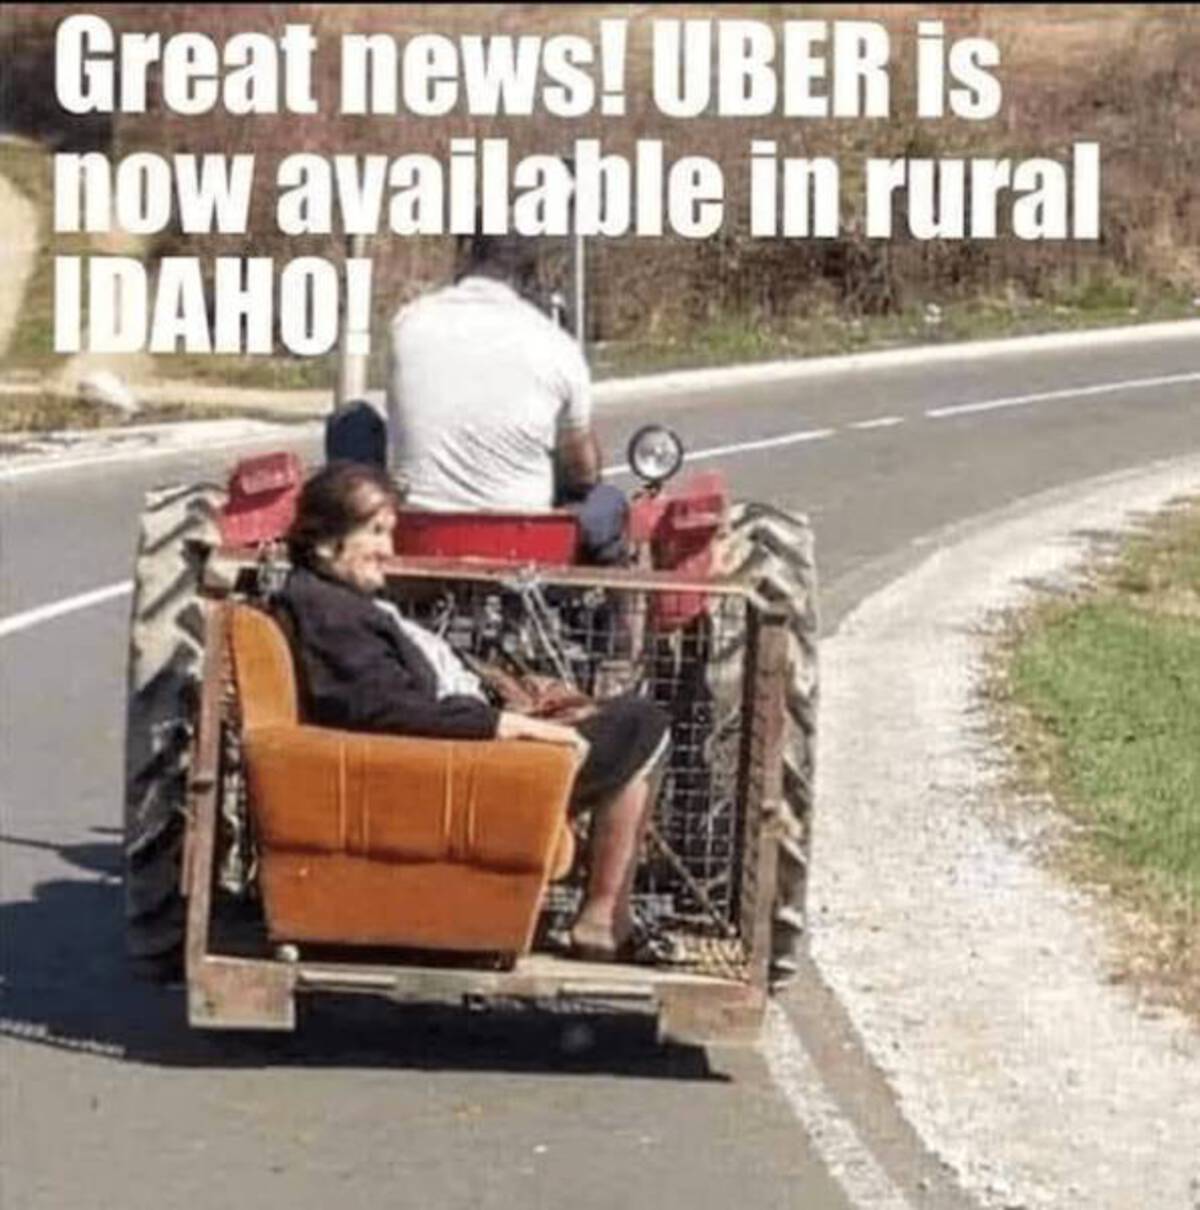 uber now available in rural idaho - Great news! Uber is now available in rural Idaho!